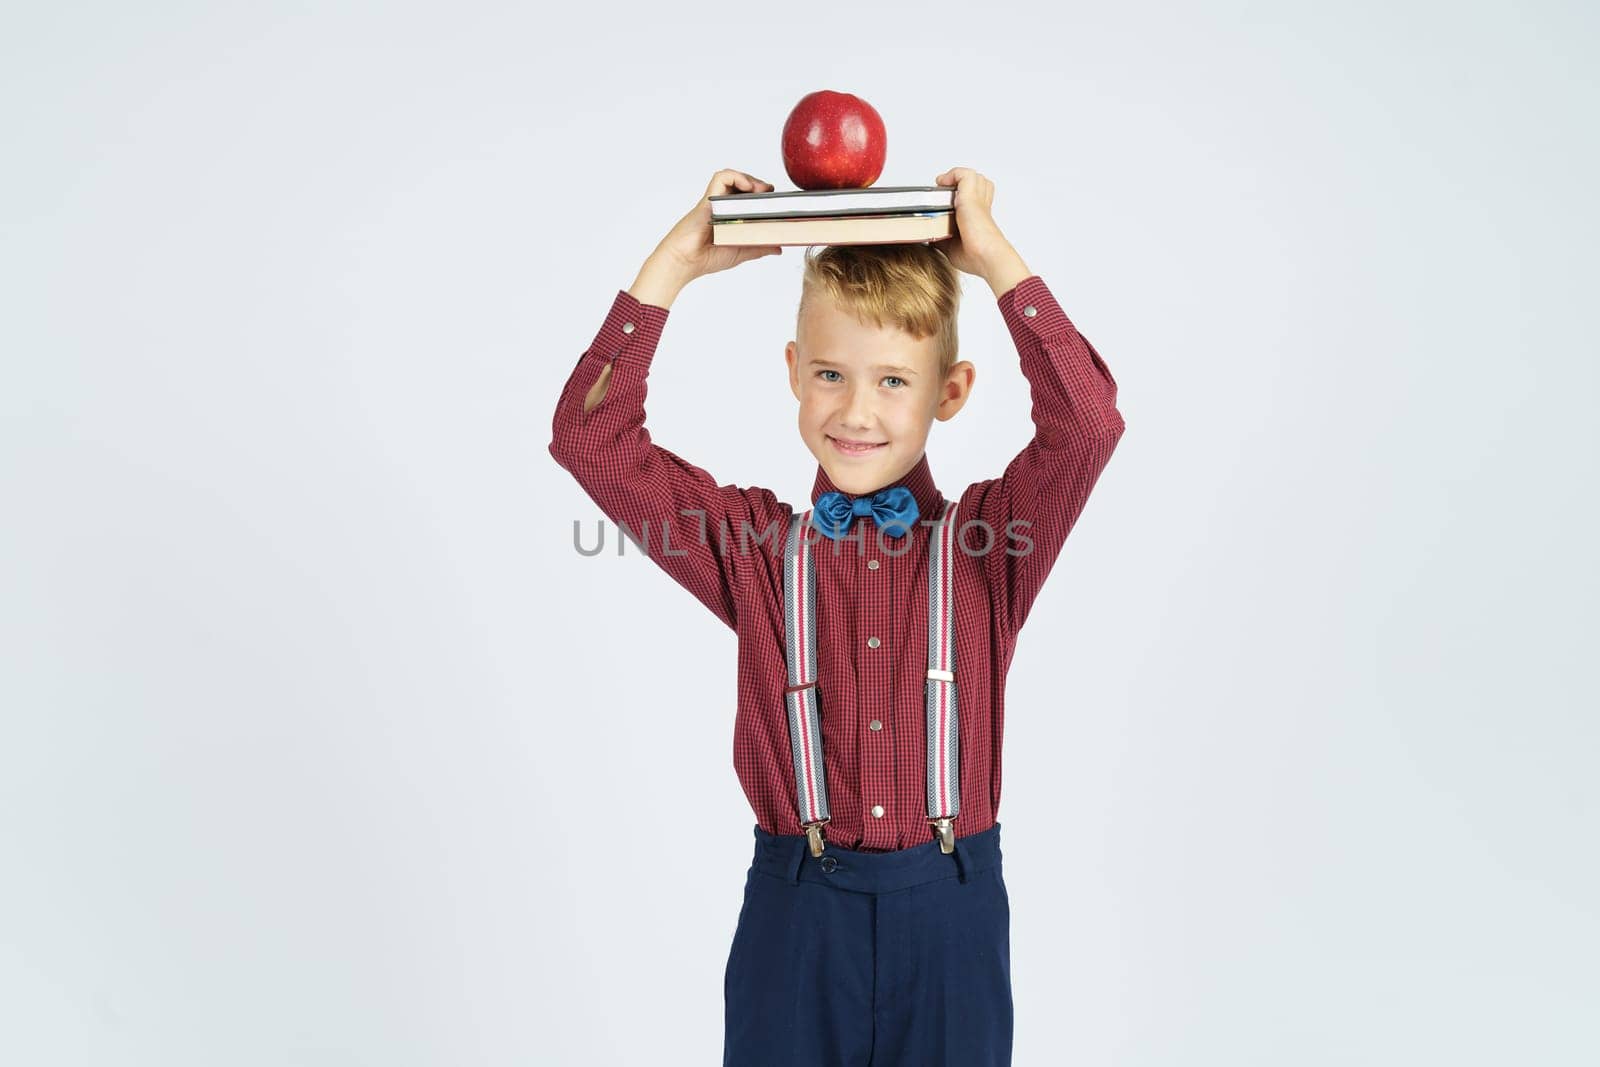 A schoolboy holds books with an apple on his head, smiles. Isolated background. by Sd28DimoN_1976